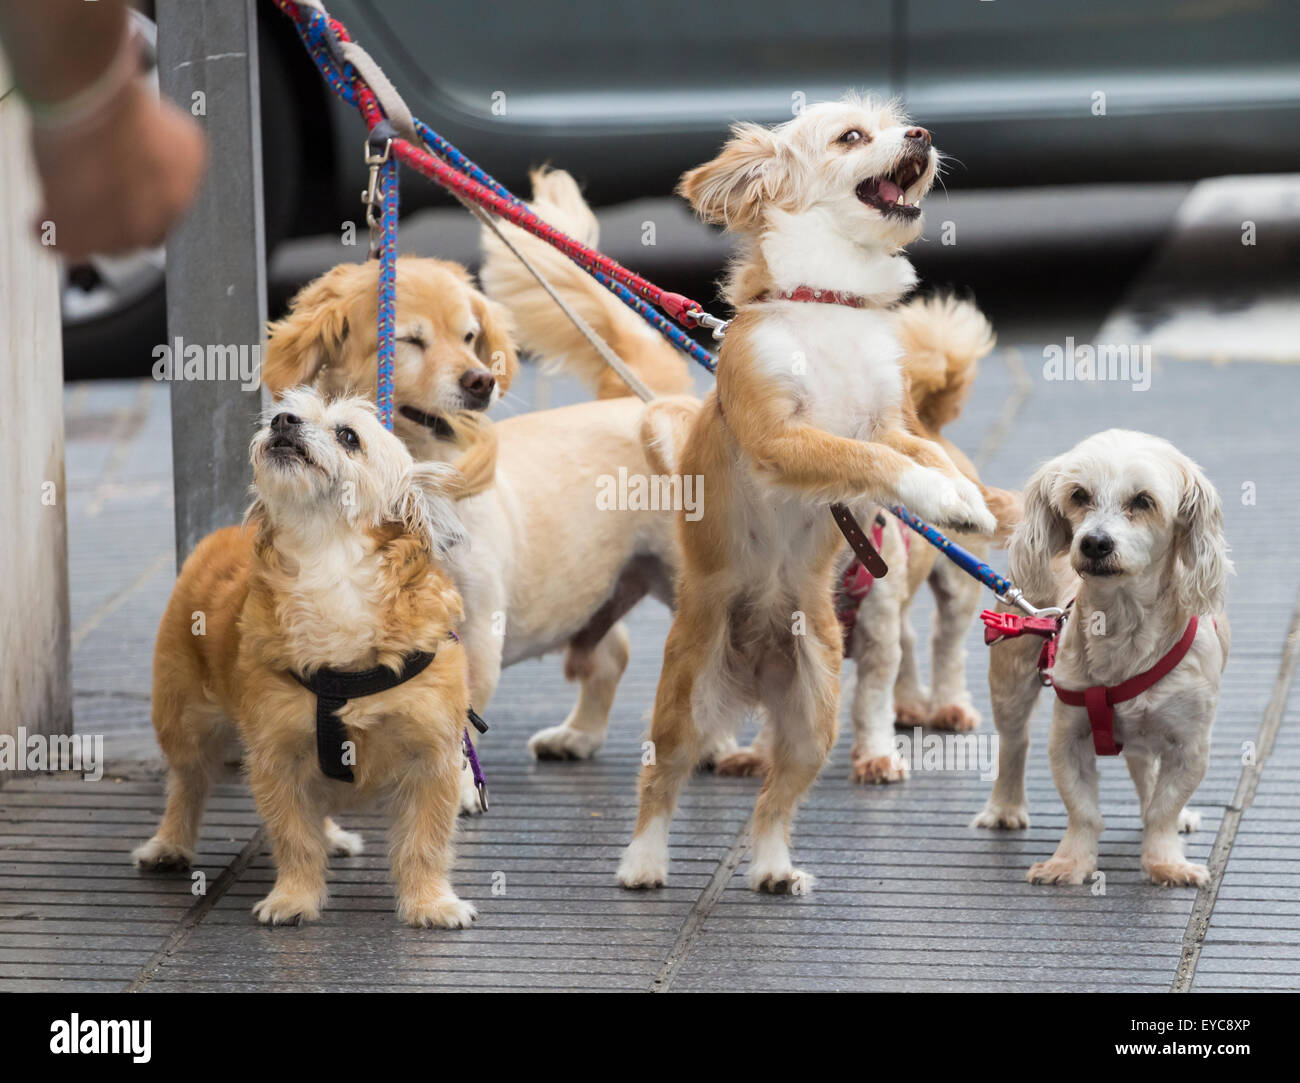 Series of images showing  dogs animated expressions and reactions as they wait for owner outside shop. search ajd123 to see all images. Stock Photo